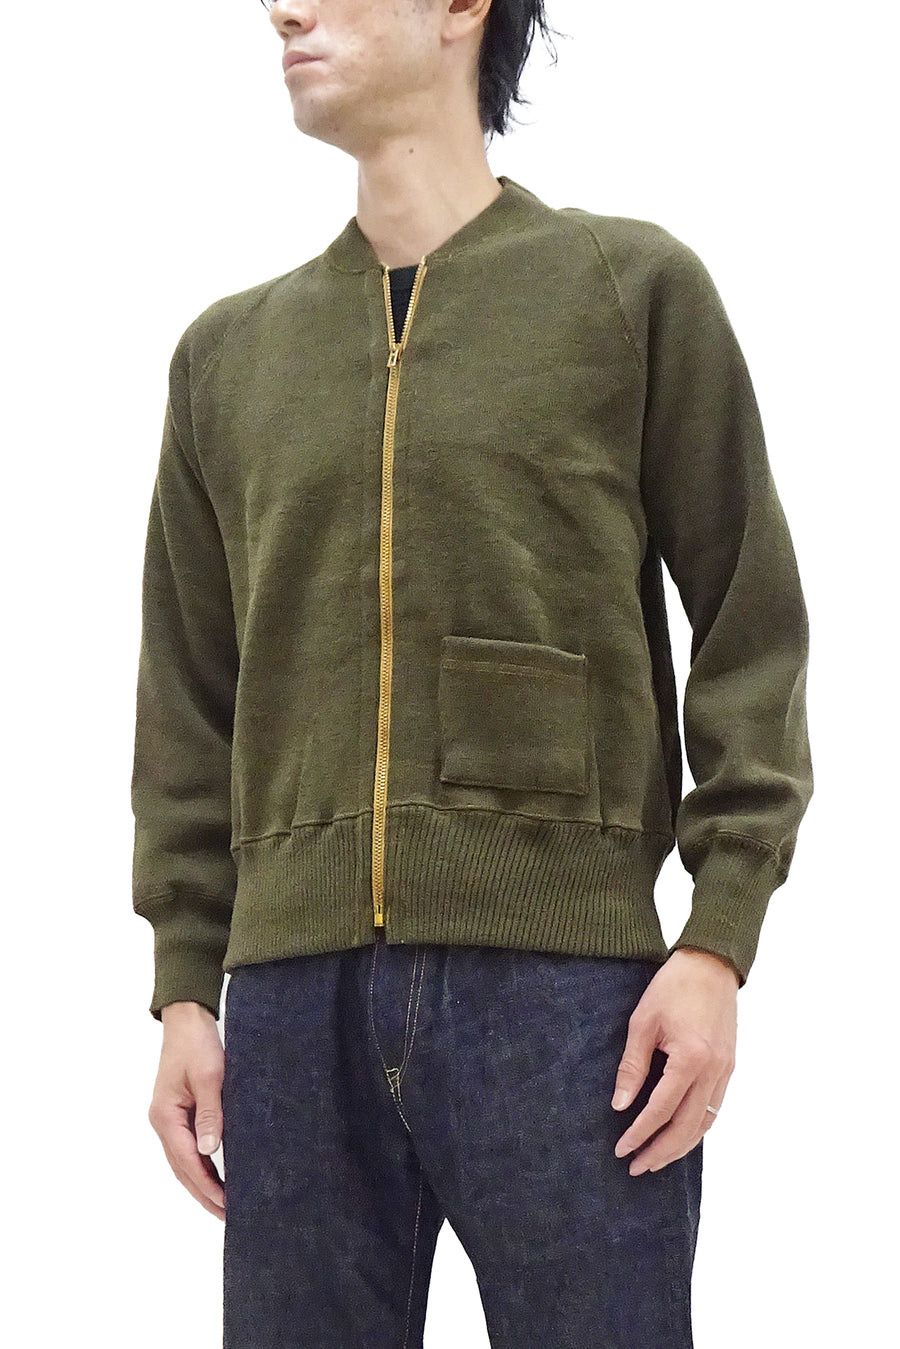 Buzz Rickson Zip Front Sweater Men's Reproduction of WWII USAAF